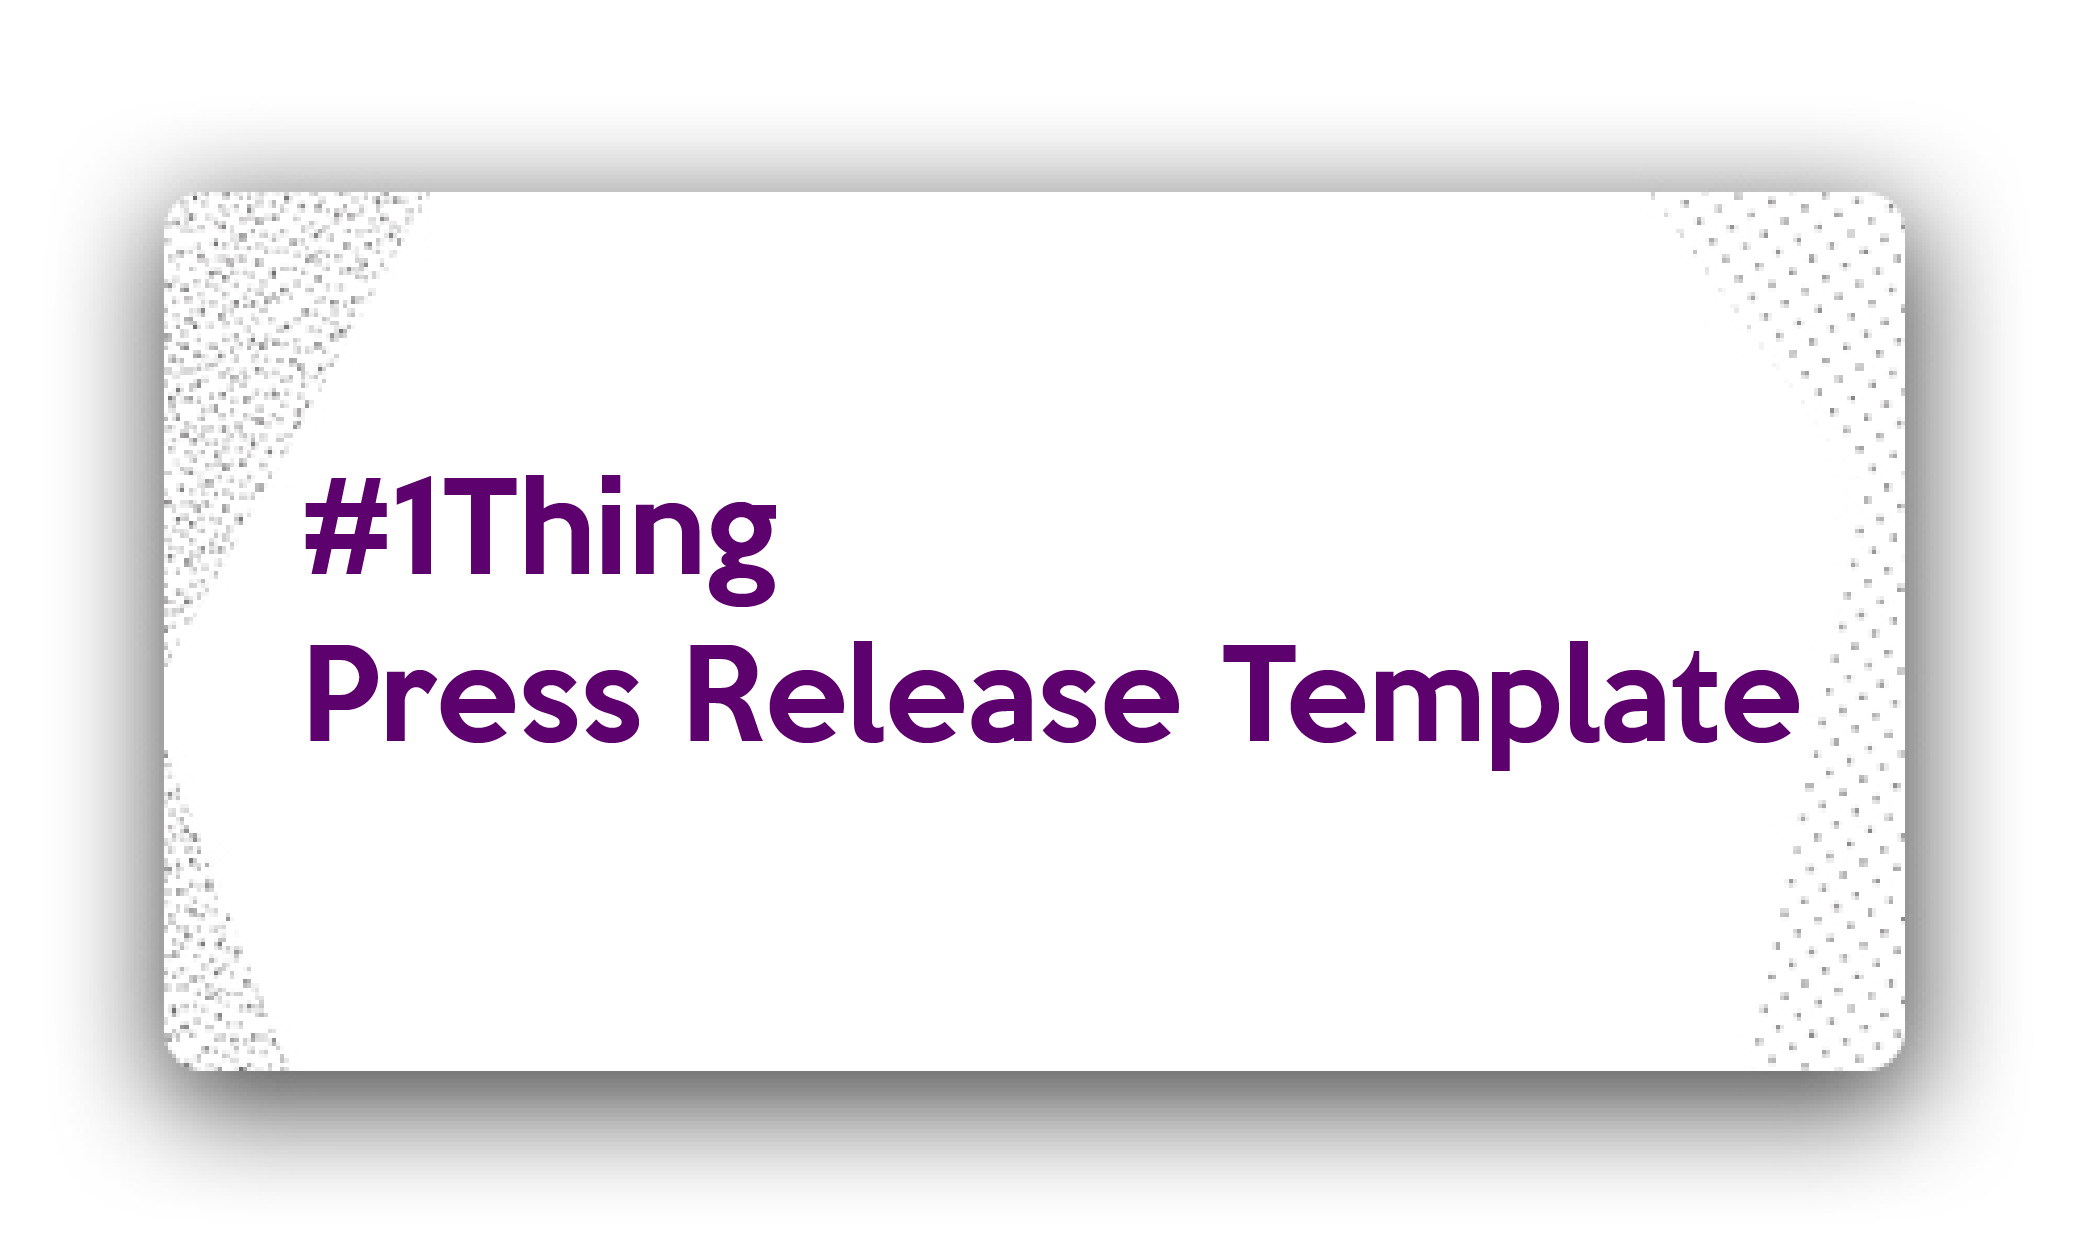 Title: 1 Thing Press Release Template